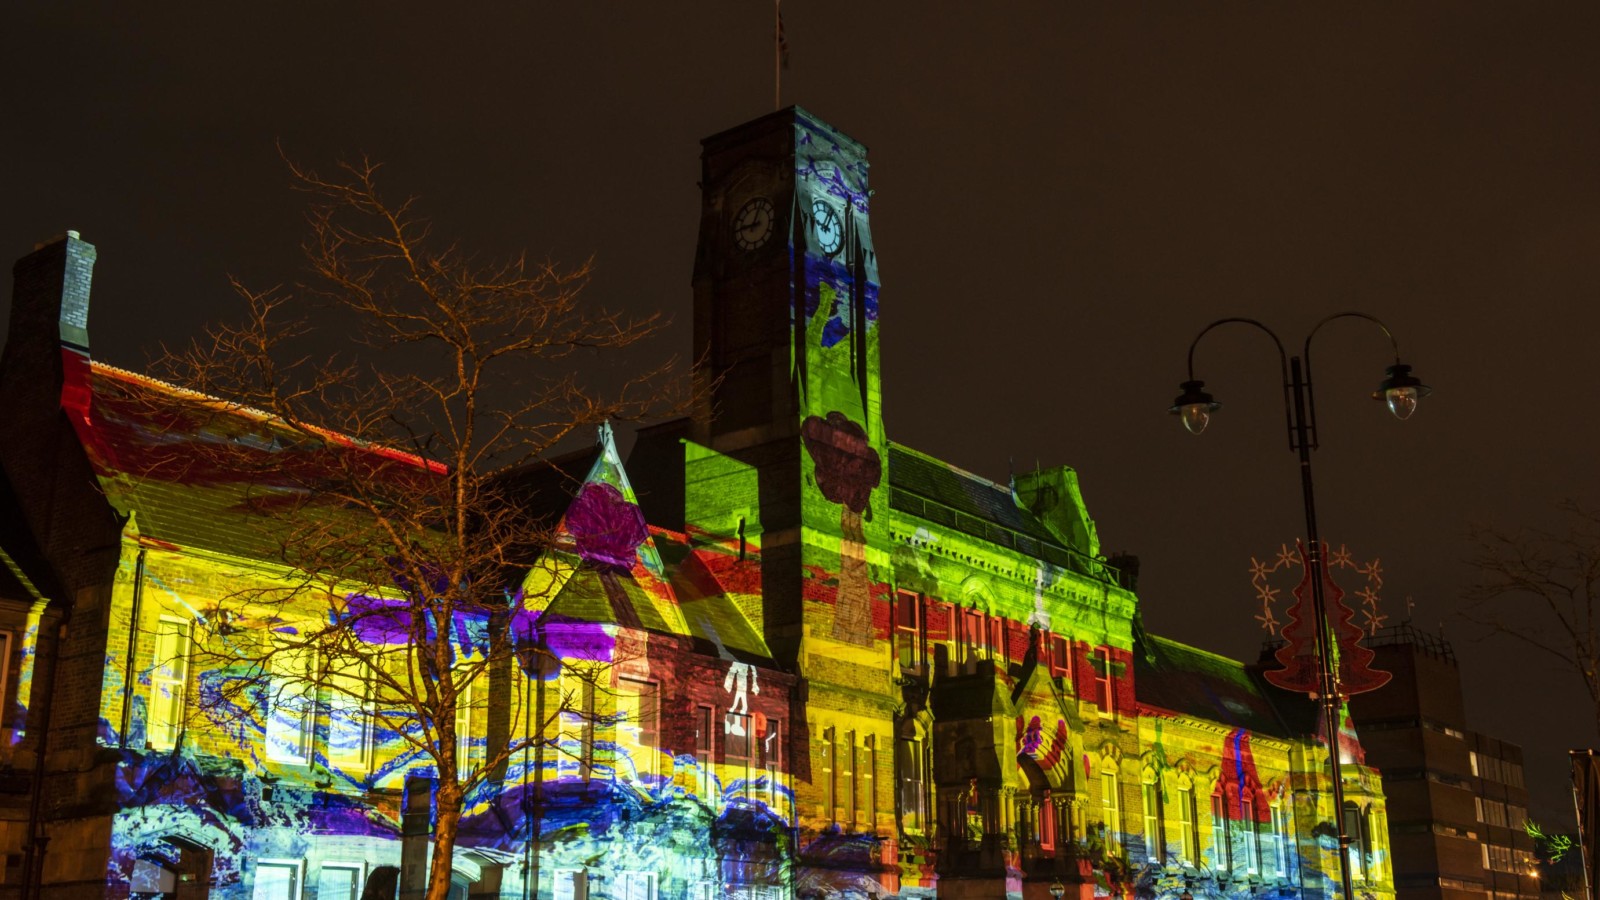 St Helens Town Hall is lit up with a huge multicoloured projection against a night sky.